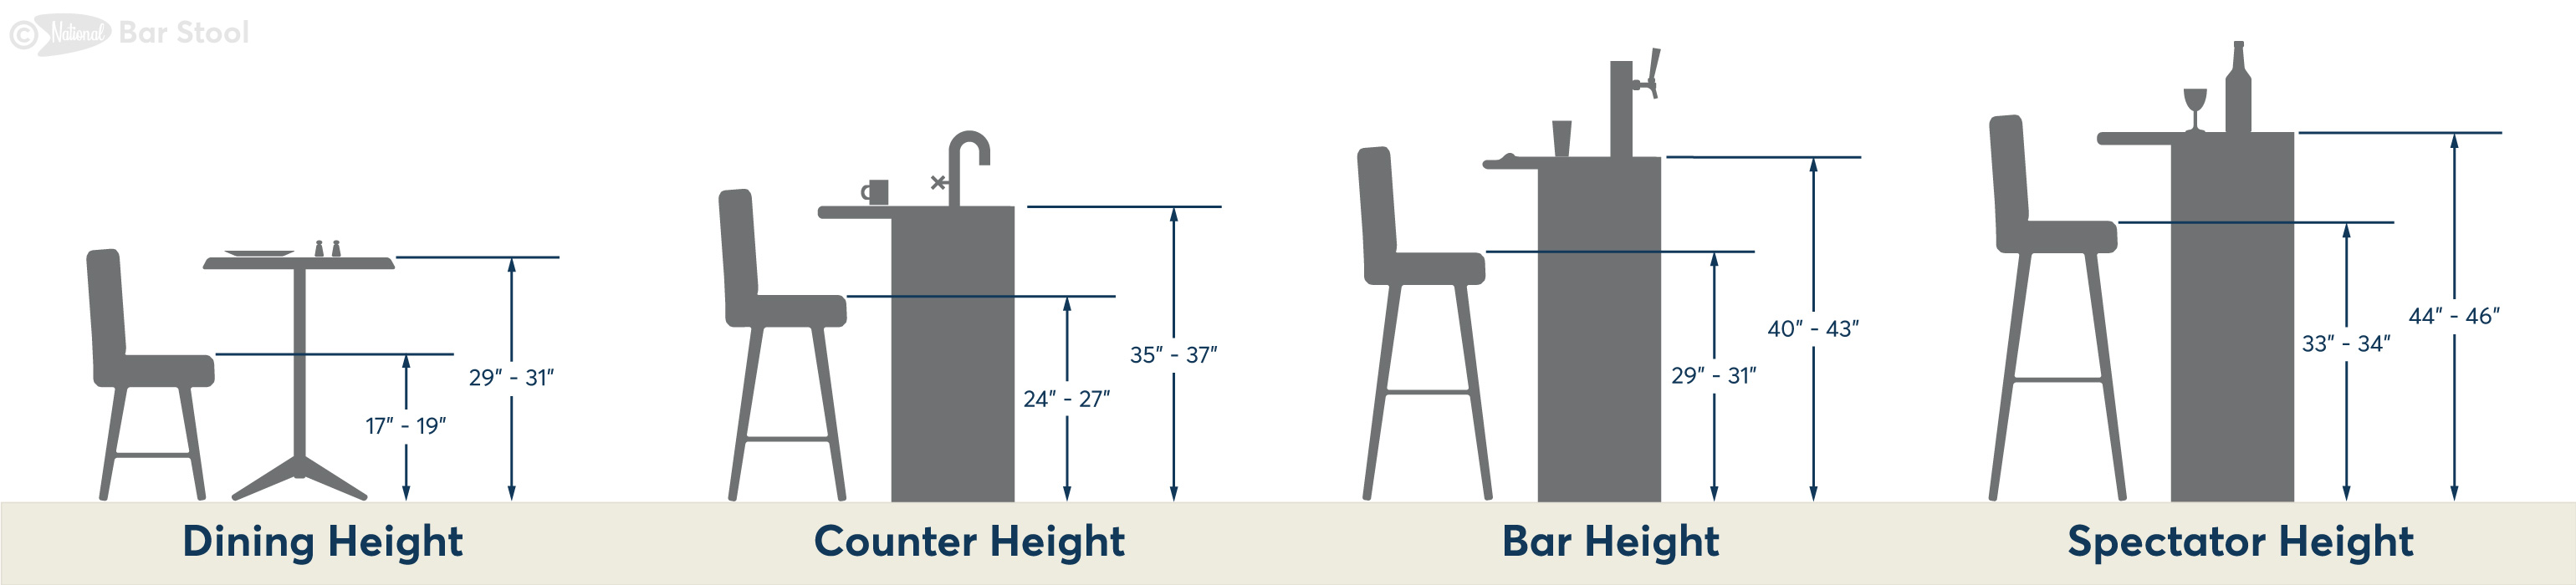 Bar Stool Ing Guide National, How To Choose Counter Stool Height